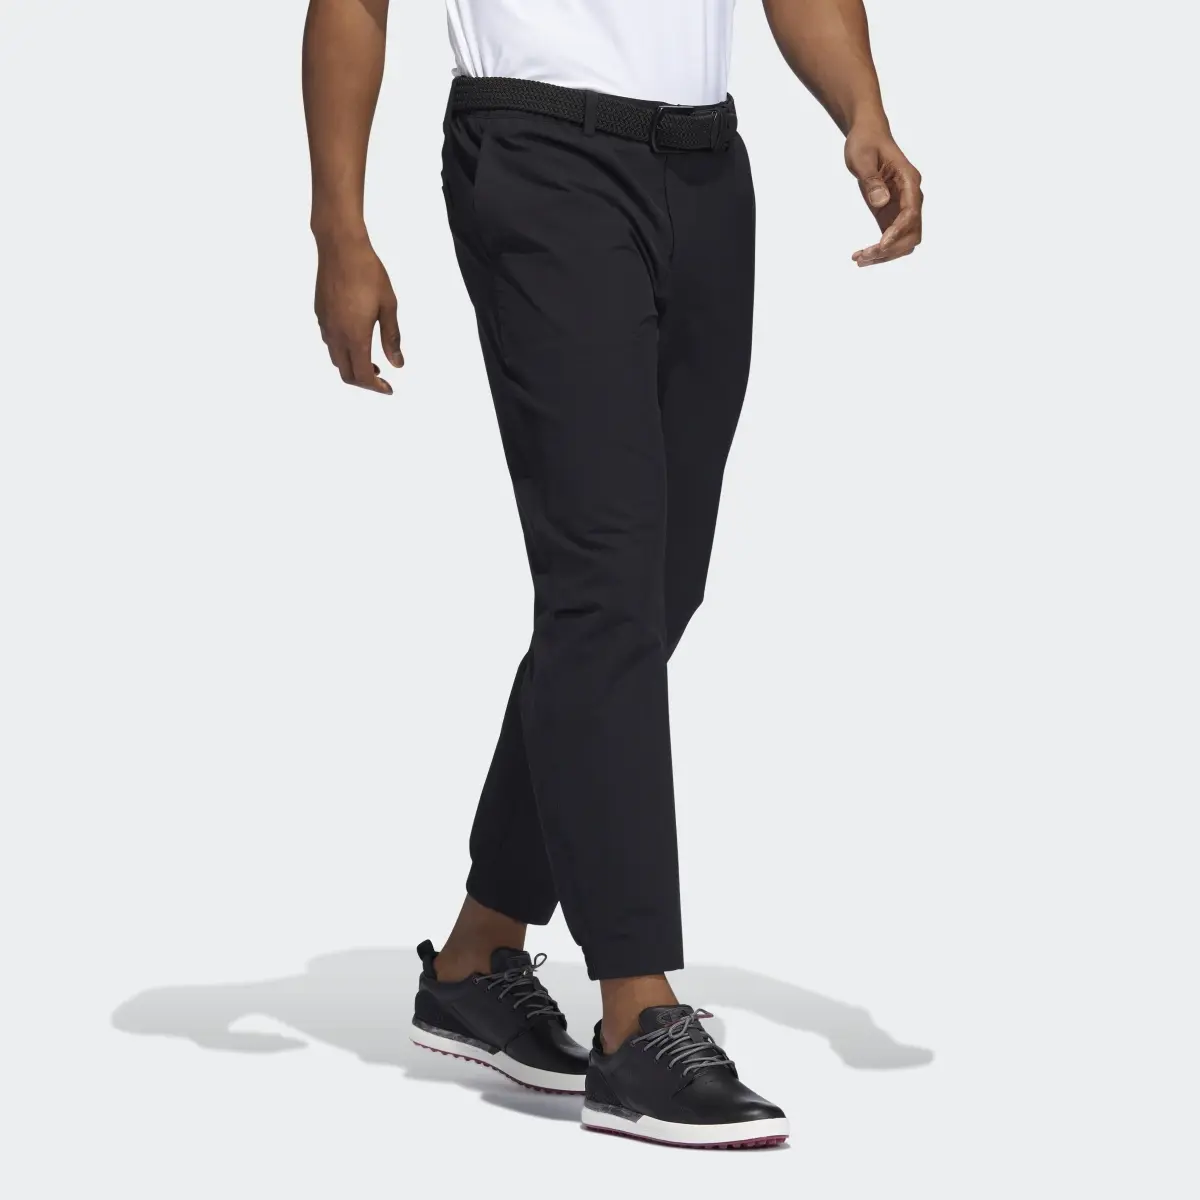 Adidas Go-To Commuter Pants. 3